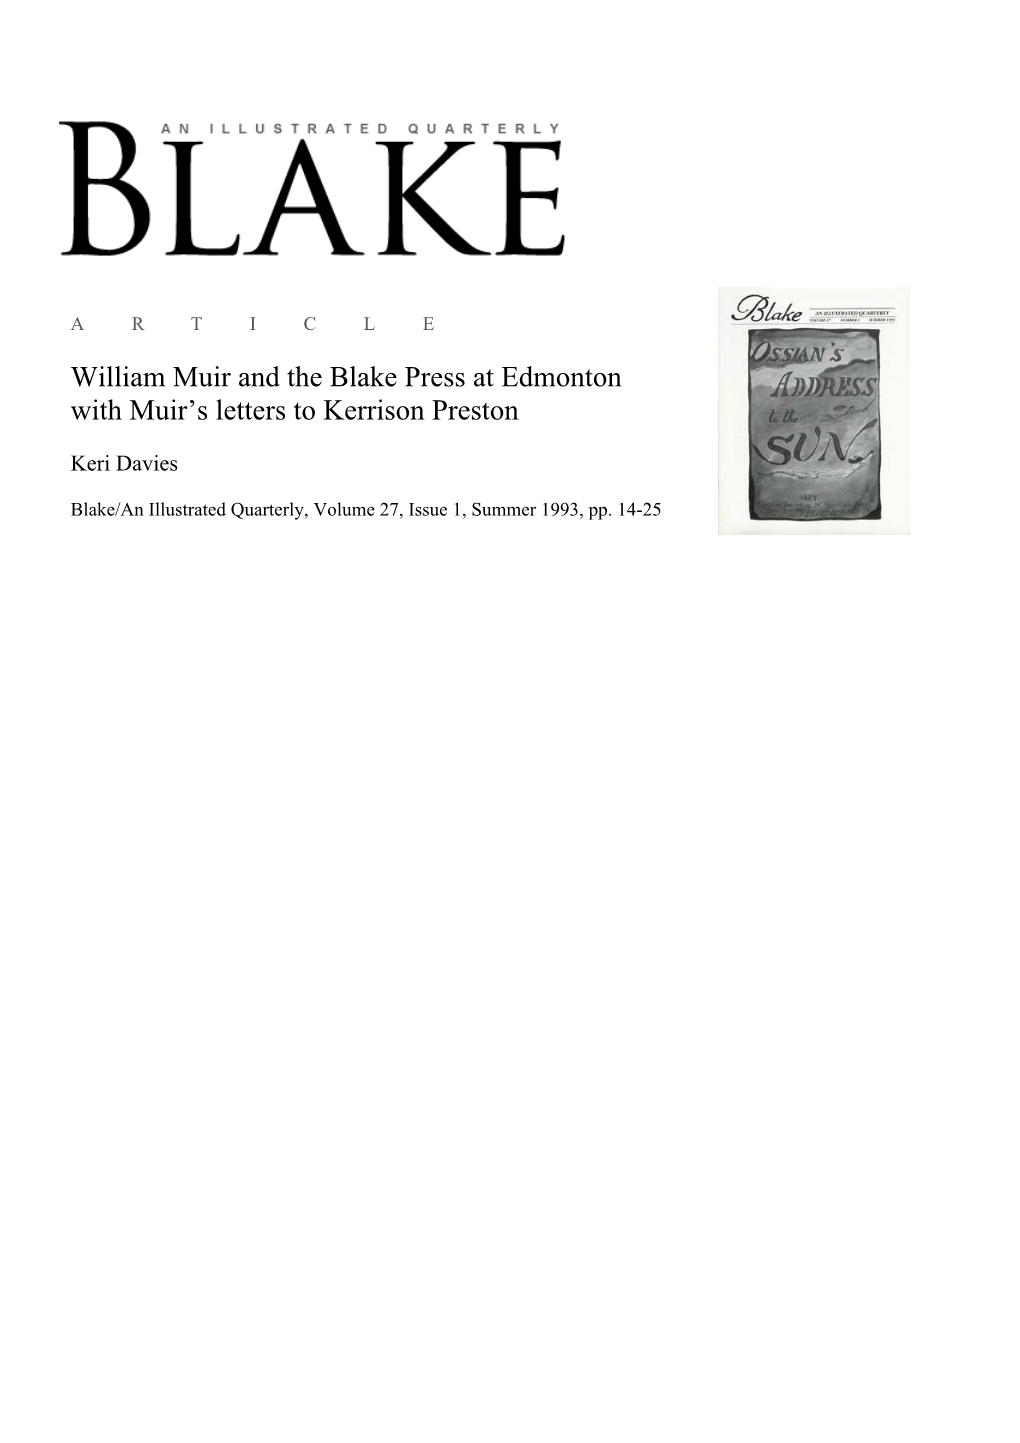 William Muir and the Blake Press at Edmonton with Muir's Letters to Kerrison Preston